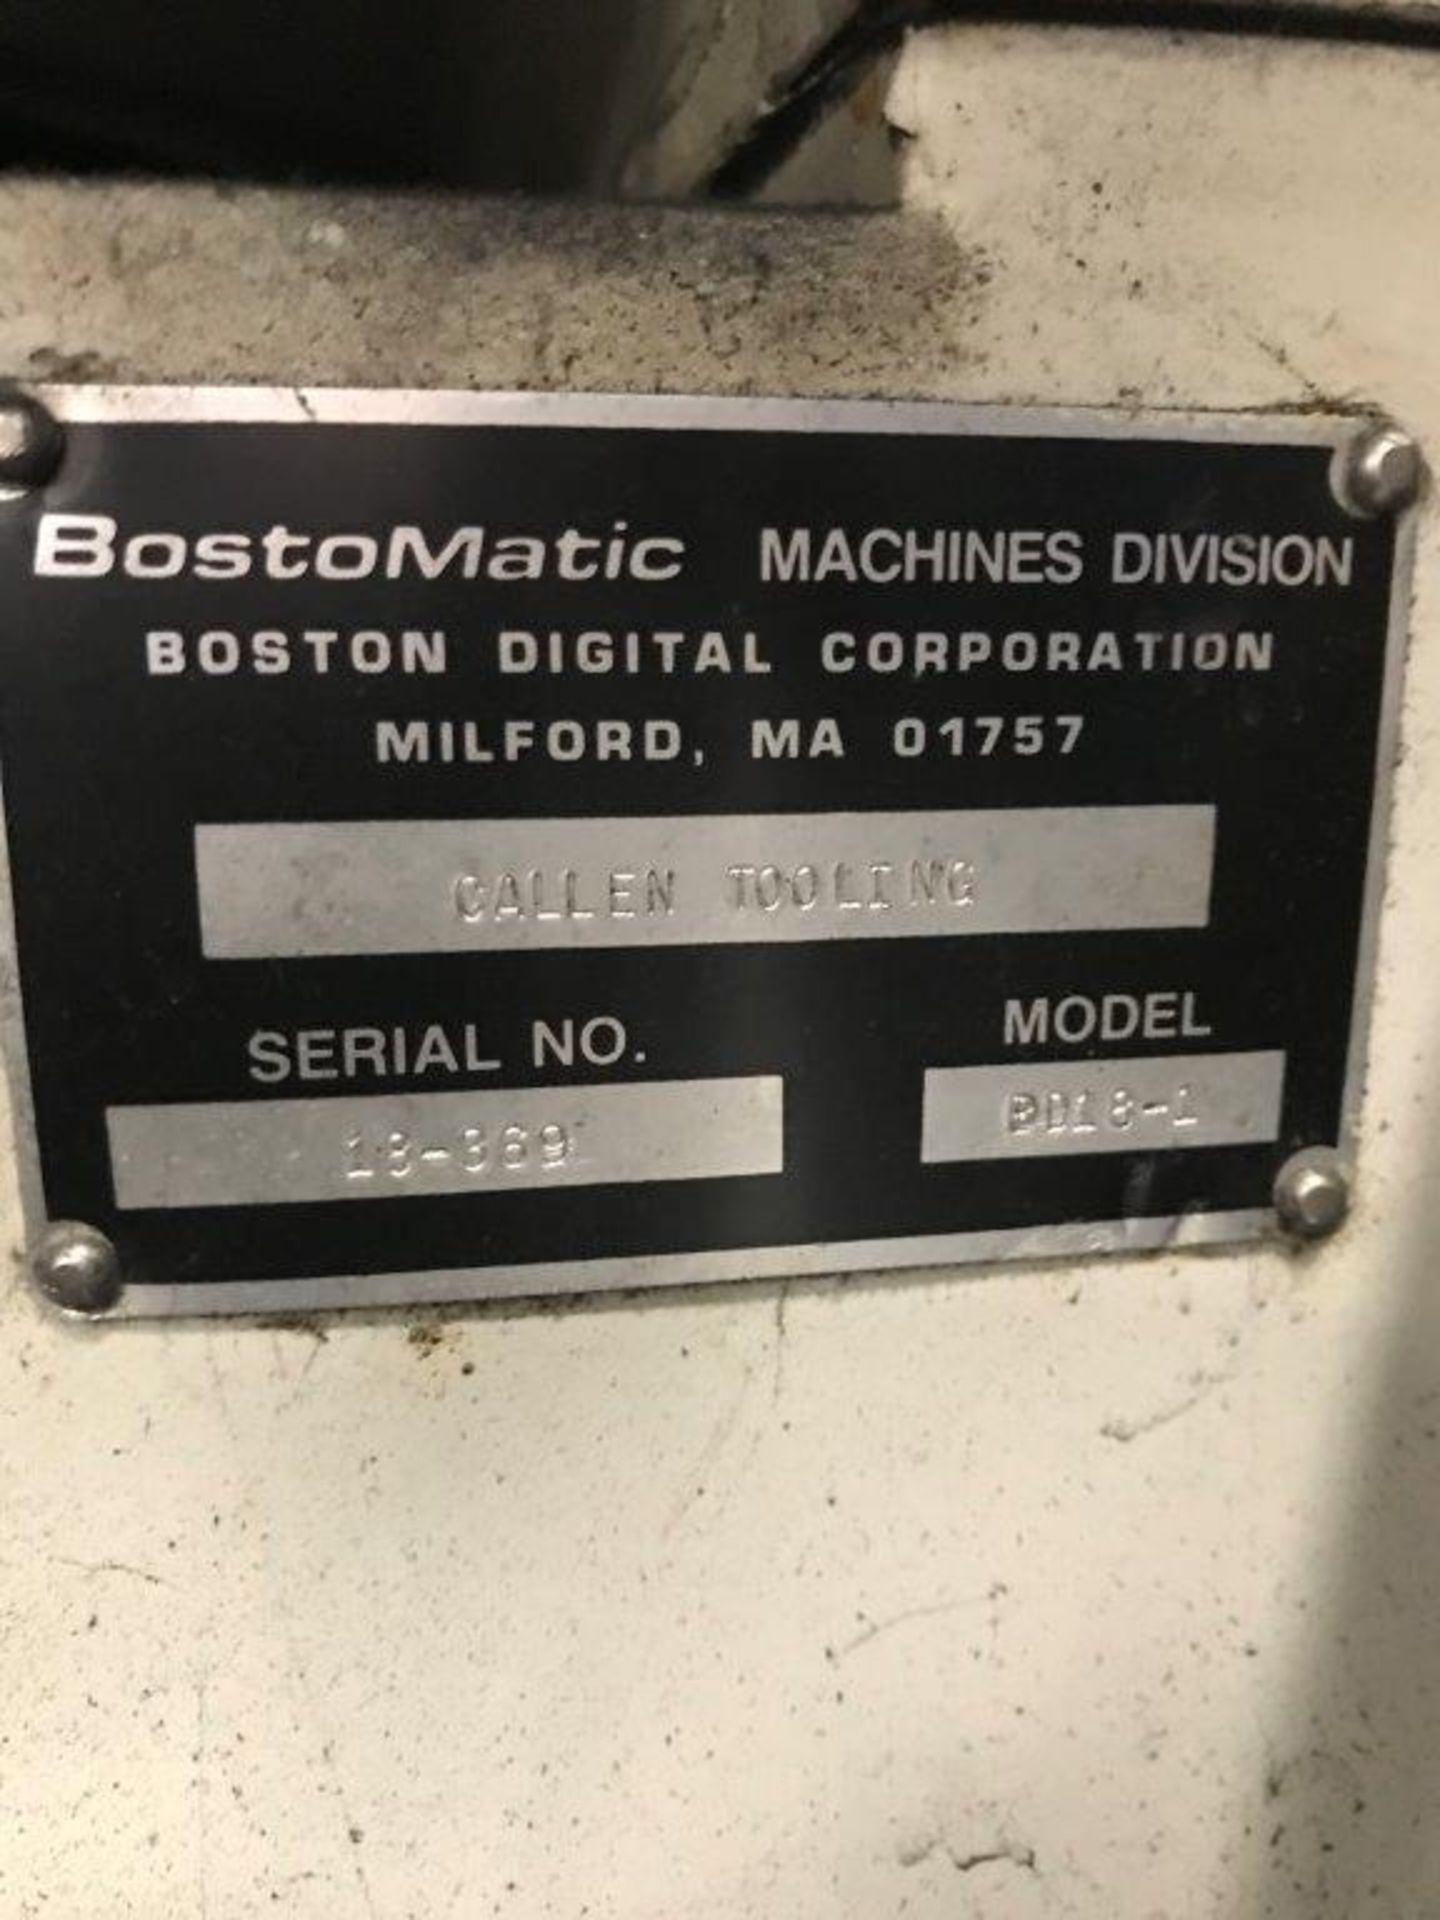 BostoMatic BD-18-1 CNC Vertical Machining Center - Image 8 of 9